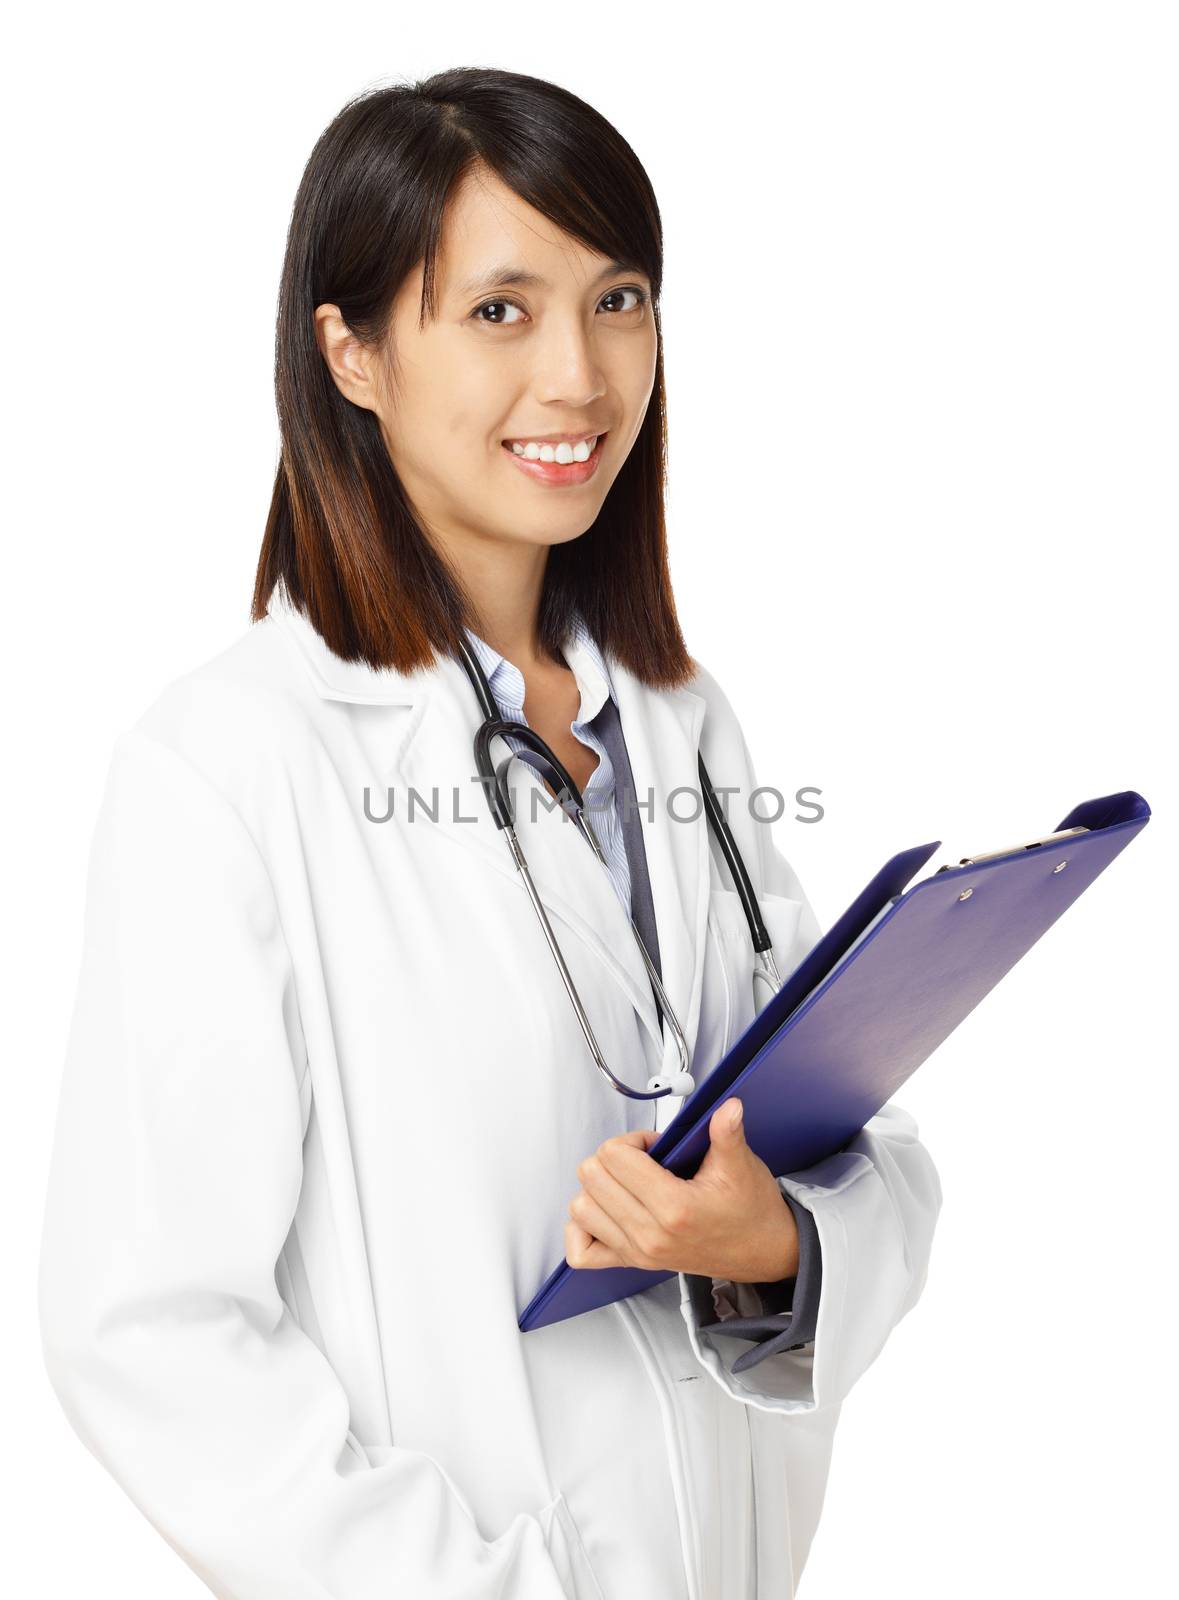 Asian female doctor with writing pad